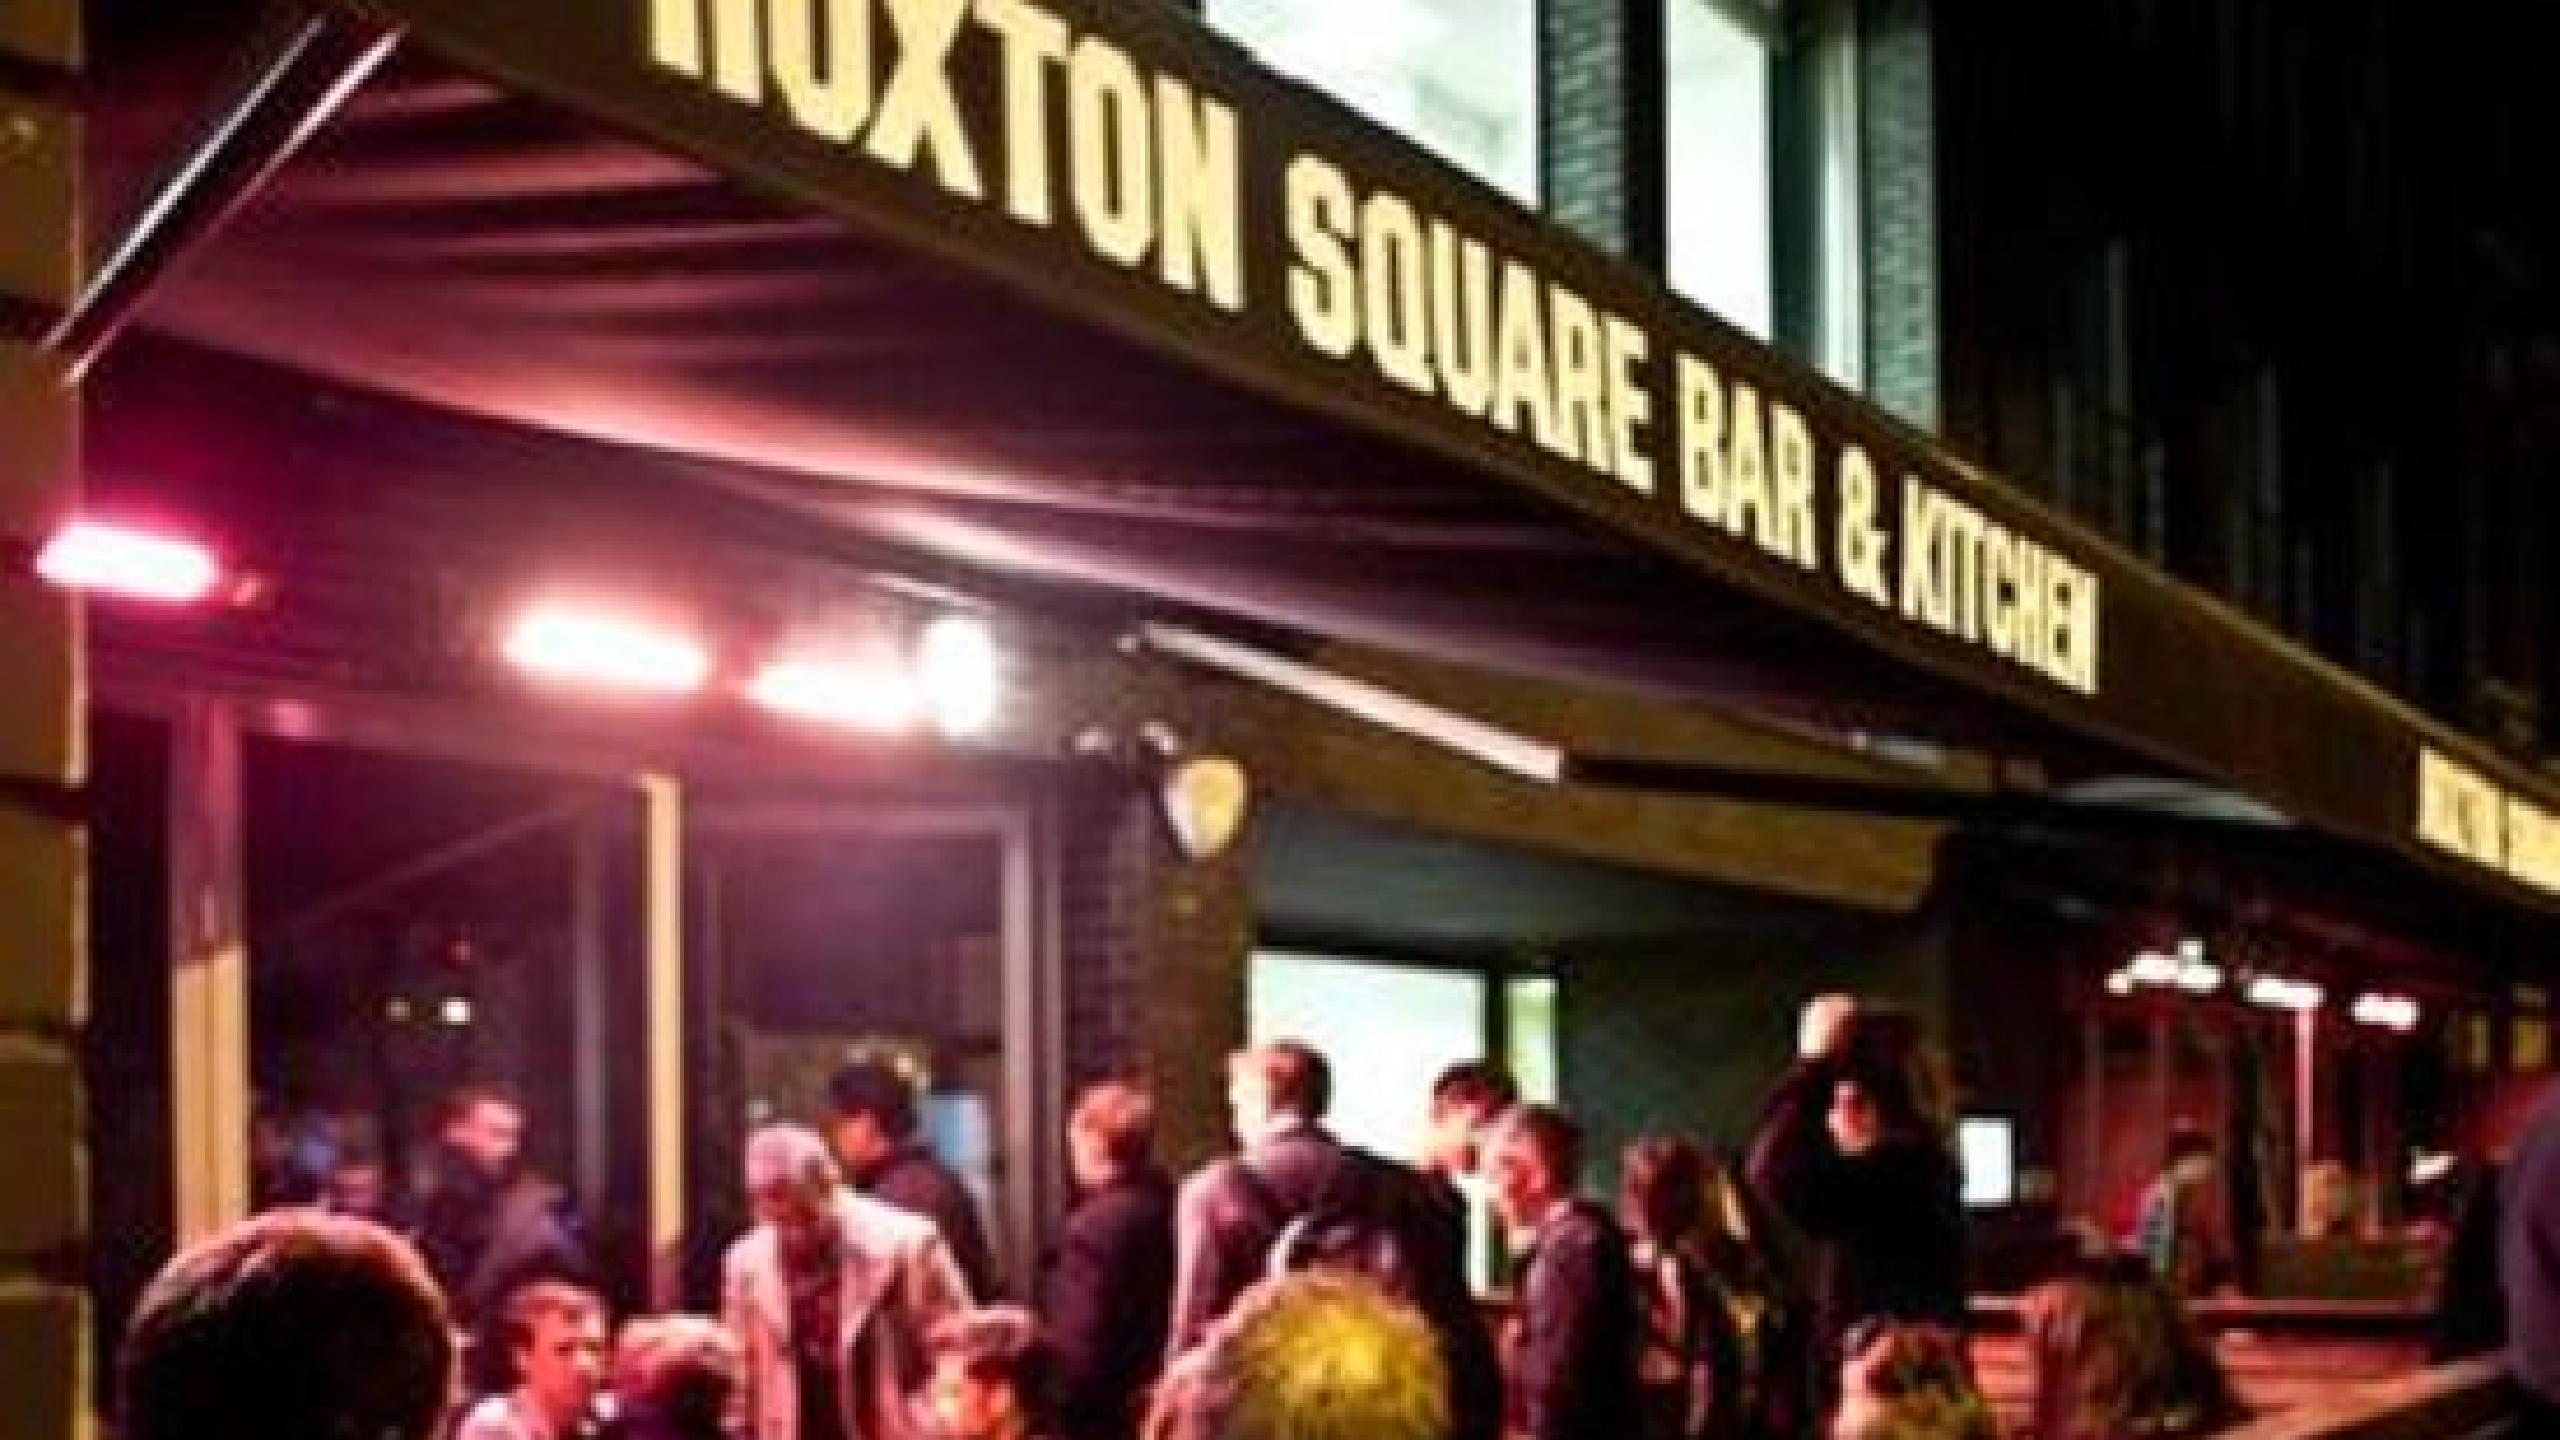 hoxton square bar and kitchen tickets